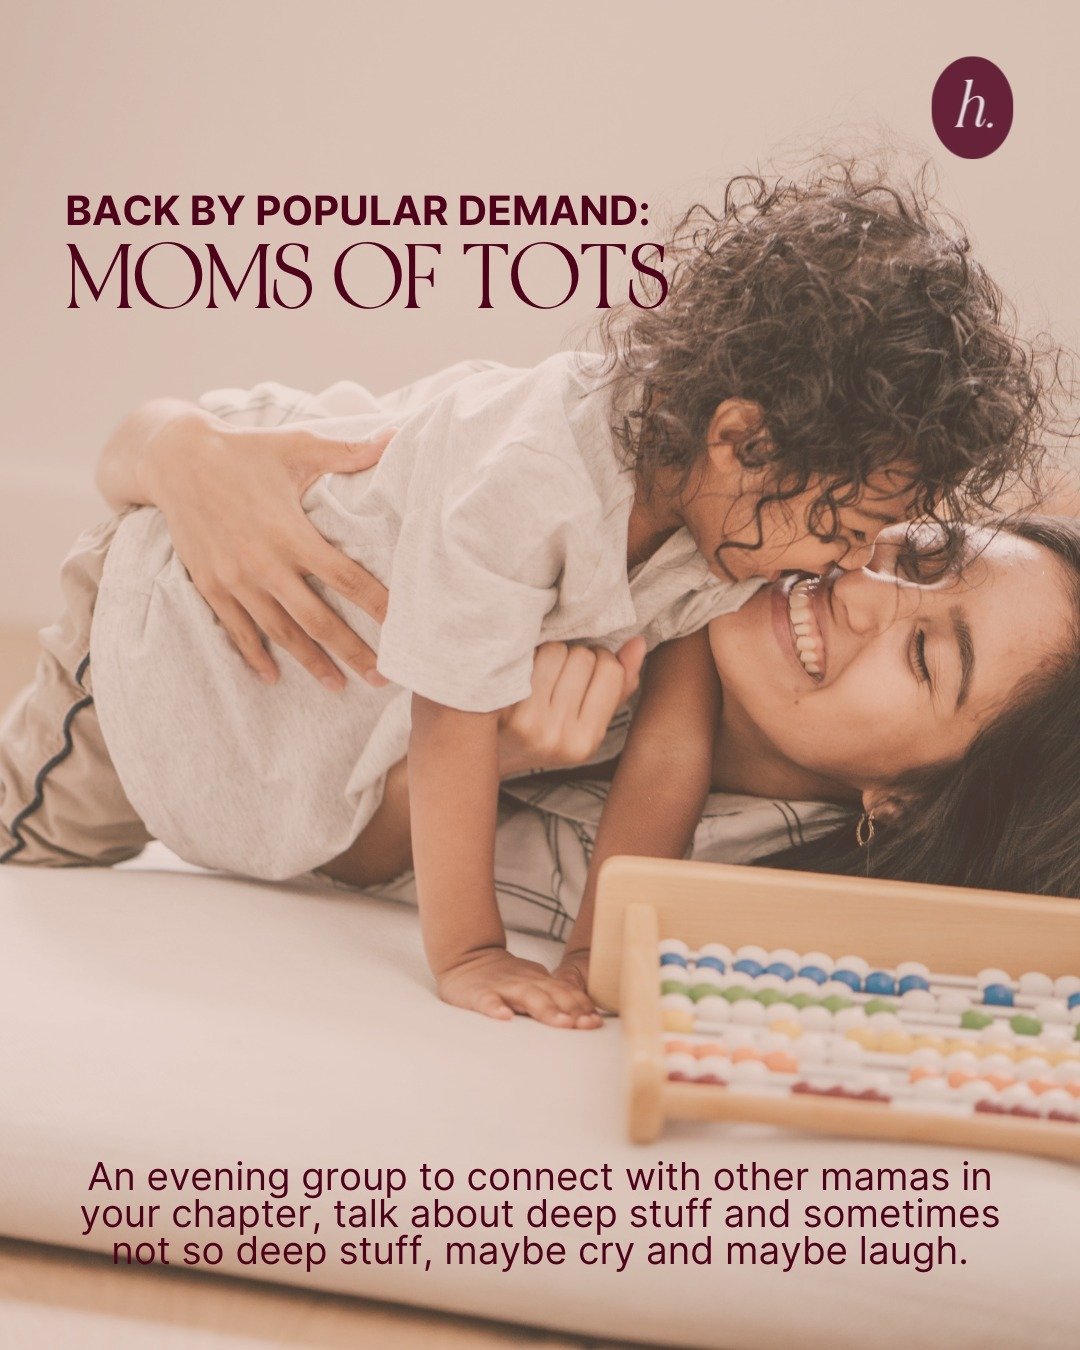 Moms of Tots - an evening group for mamas of kiddos 1-5(ish) is back!⁠
⁠
Mothering tots is a whole different ballgame, Honey. Find your hive❤️.⁠
⁠
The first 6-week series begins Tuesday, May 14 @ 7pm⁠
⁠
⁠
⁠
⁠
⁠
⁠
⁠
⁠
⁠
⁠
⁠
#michiganmomgroup #detroitm